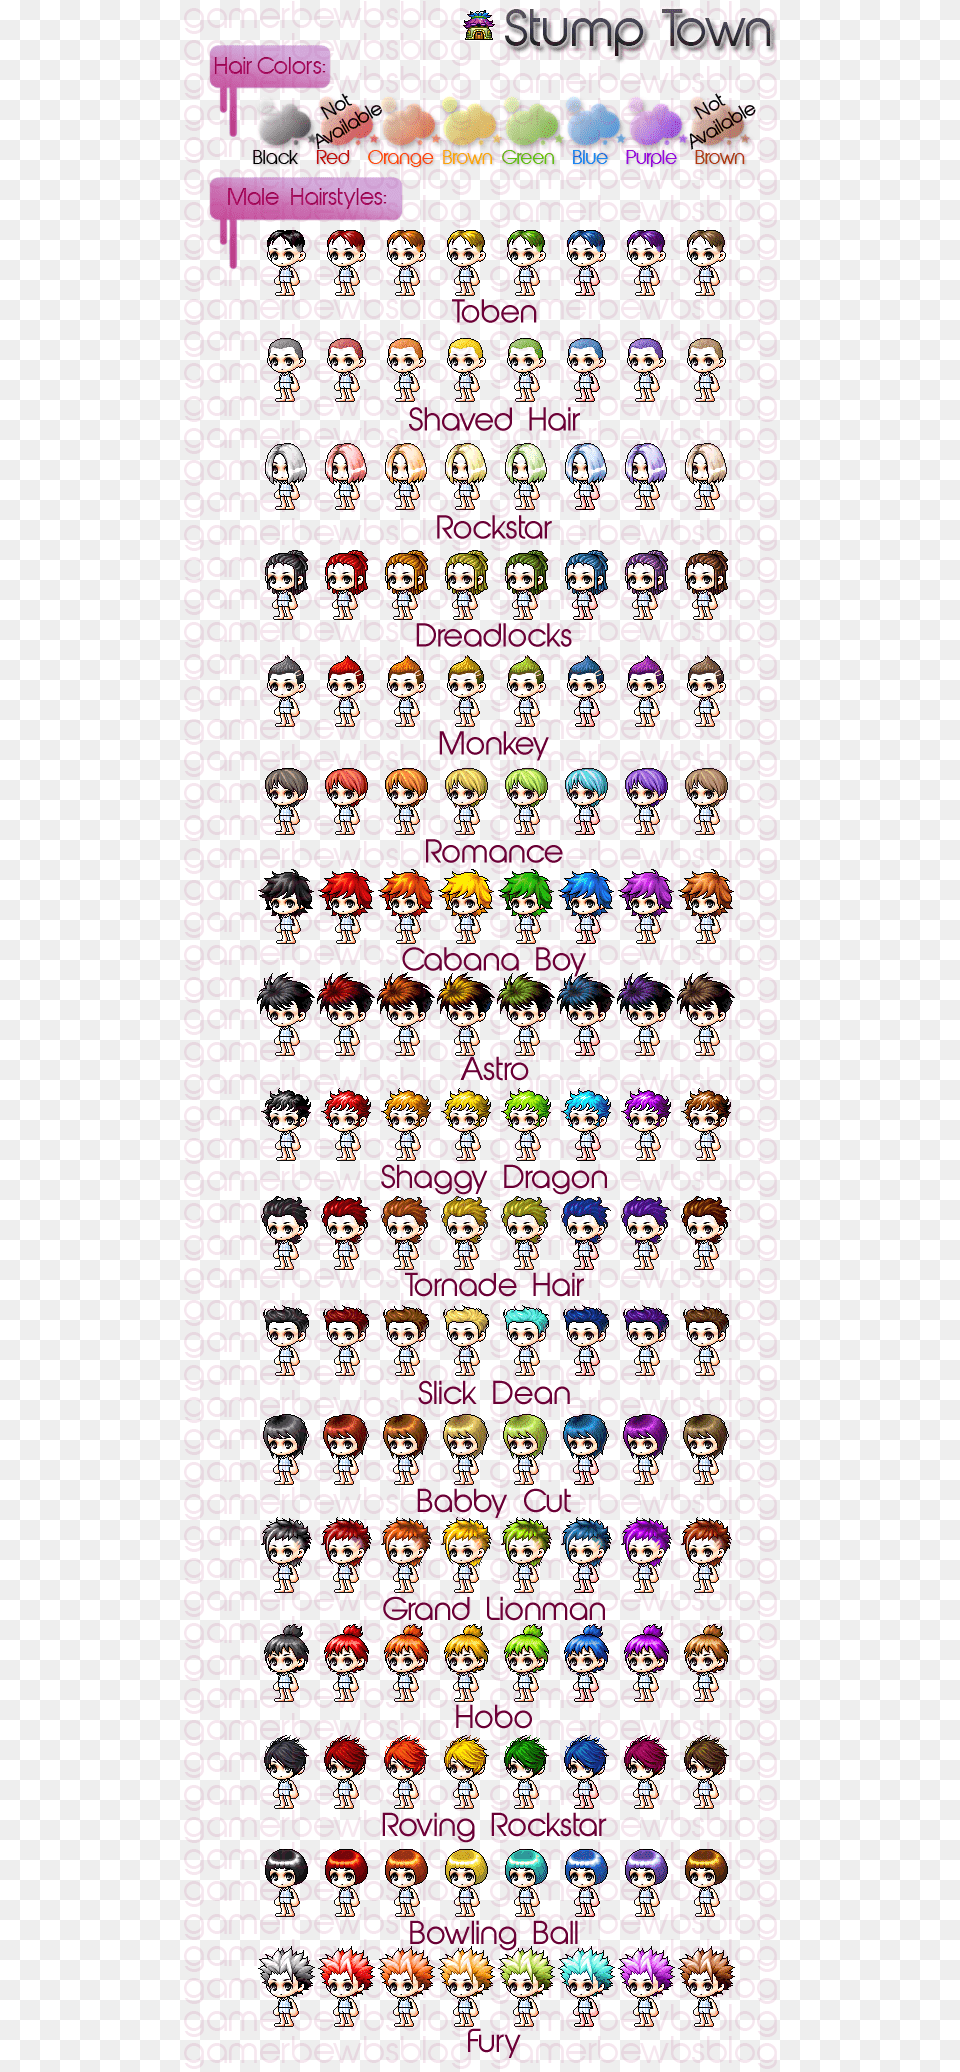 Maplestory Cute Boy Hair Maplestory Cute Boy Hair Maplestory Vip Hairstyles Male, Text, Home Decor, Person Png